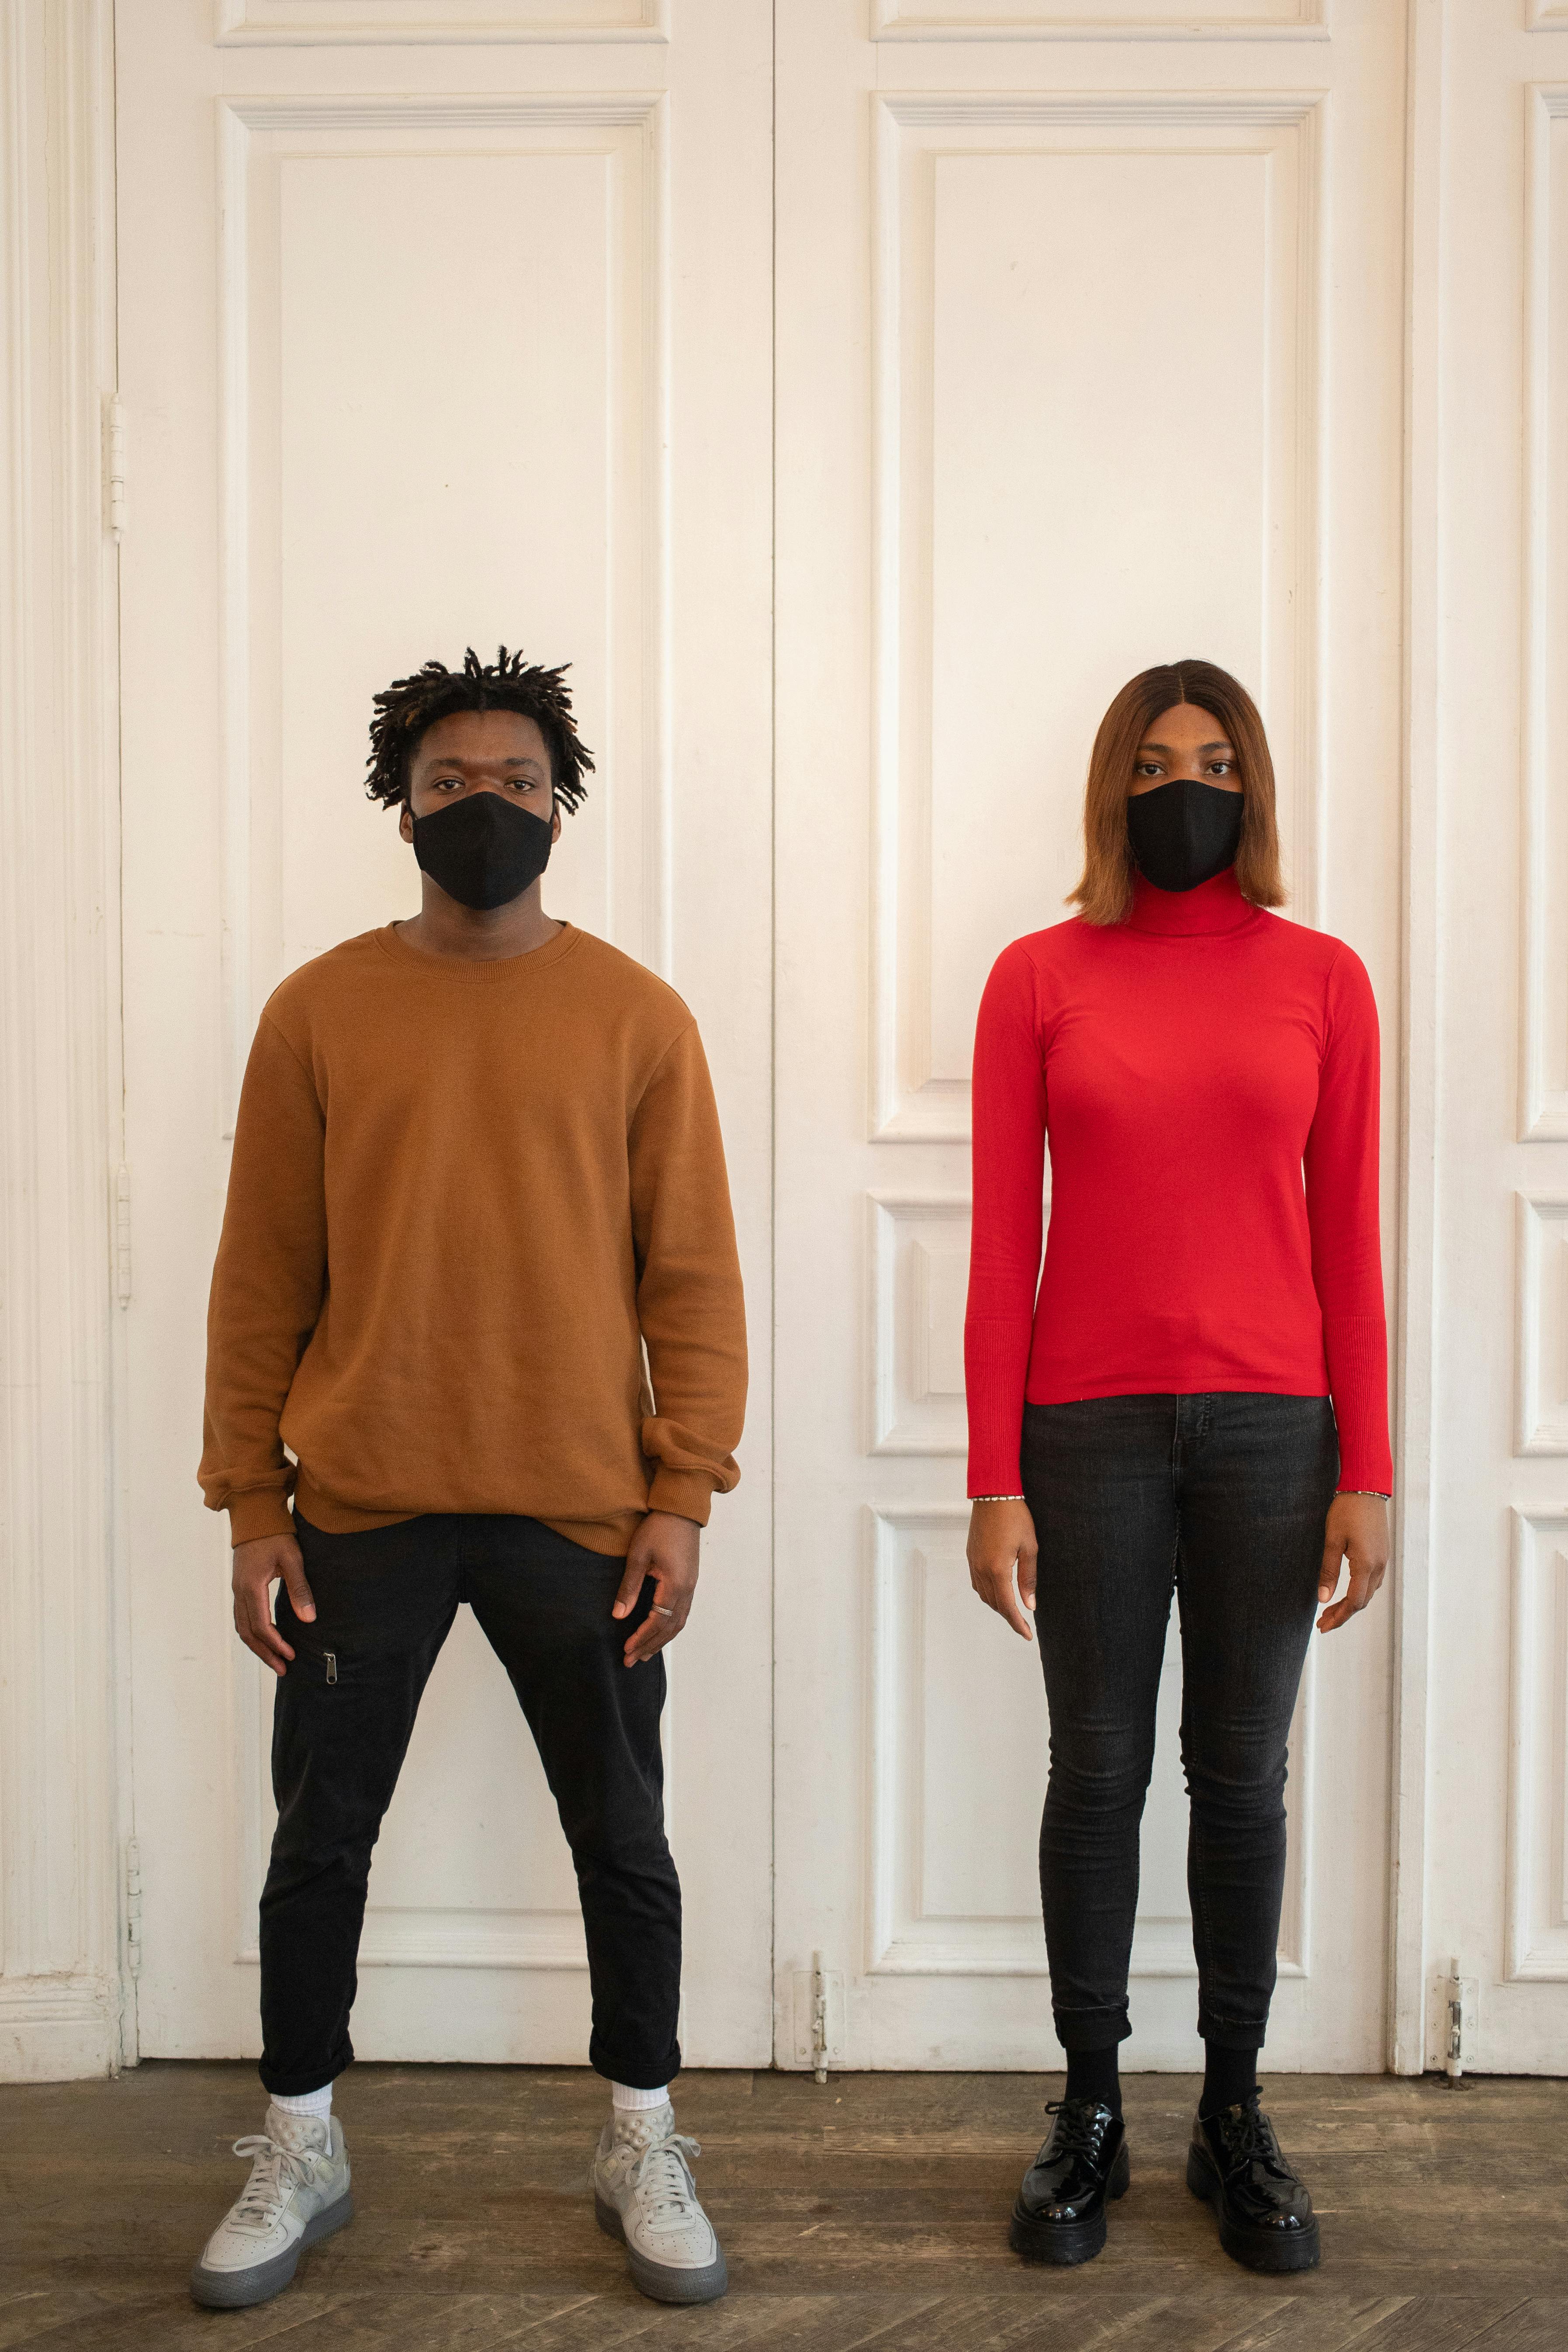 black woman and man in protective masks standing near door